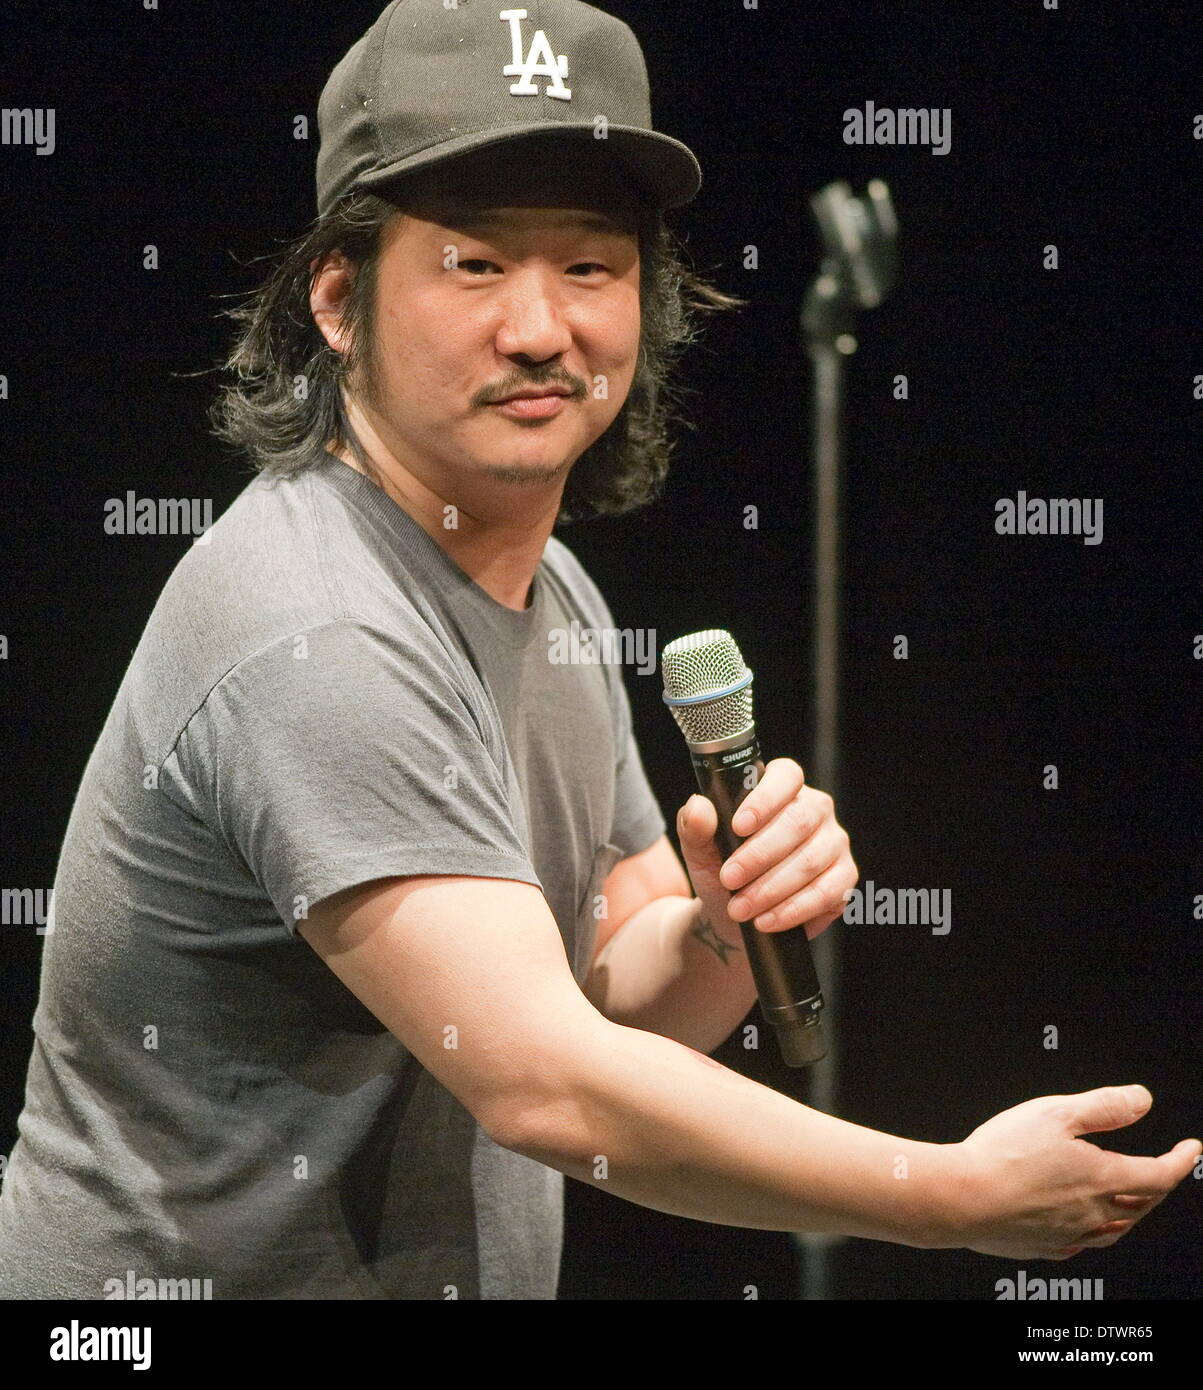 Vancouver, British Columbia, Canada. 20th Feb, 2014. Comedian BOBBY LEE at  the Best of the Fest relocated to the Vancouver Playhouse Theatre during  the inaugural NorthWest Comedy Fest in Vancouver. © Heinz